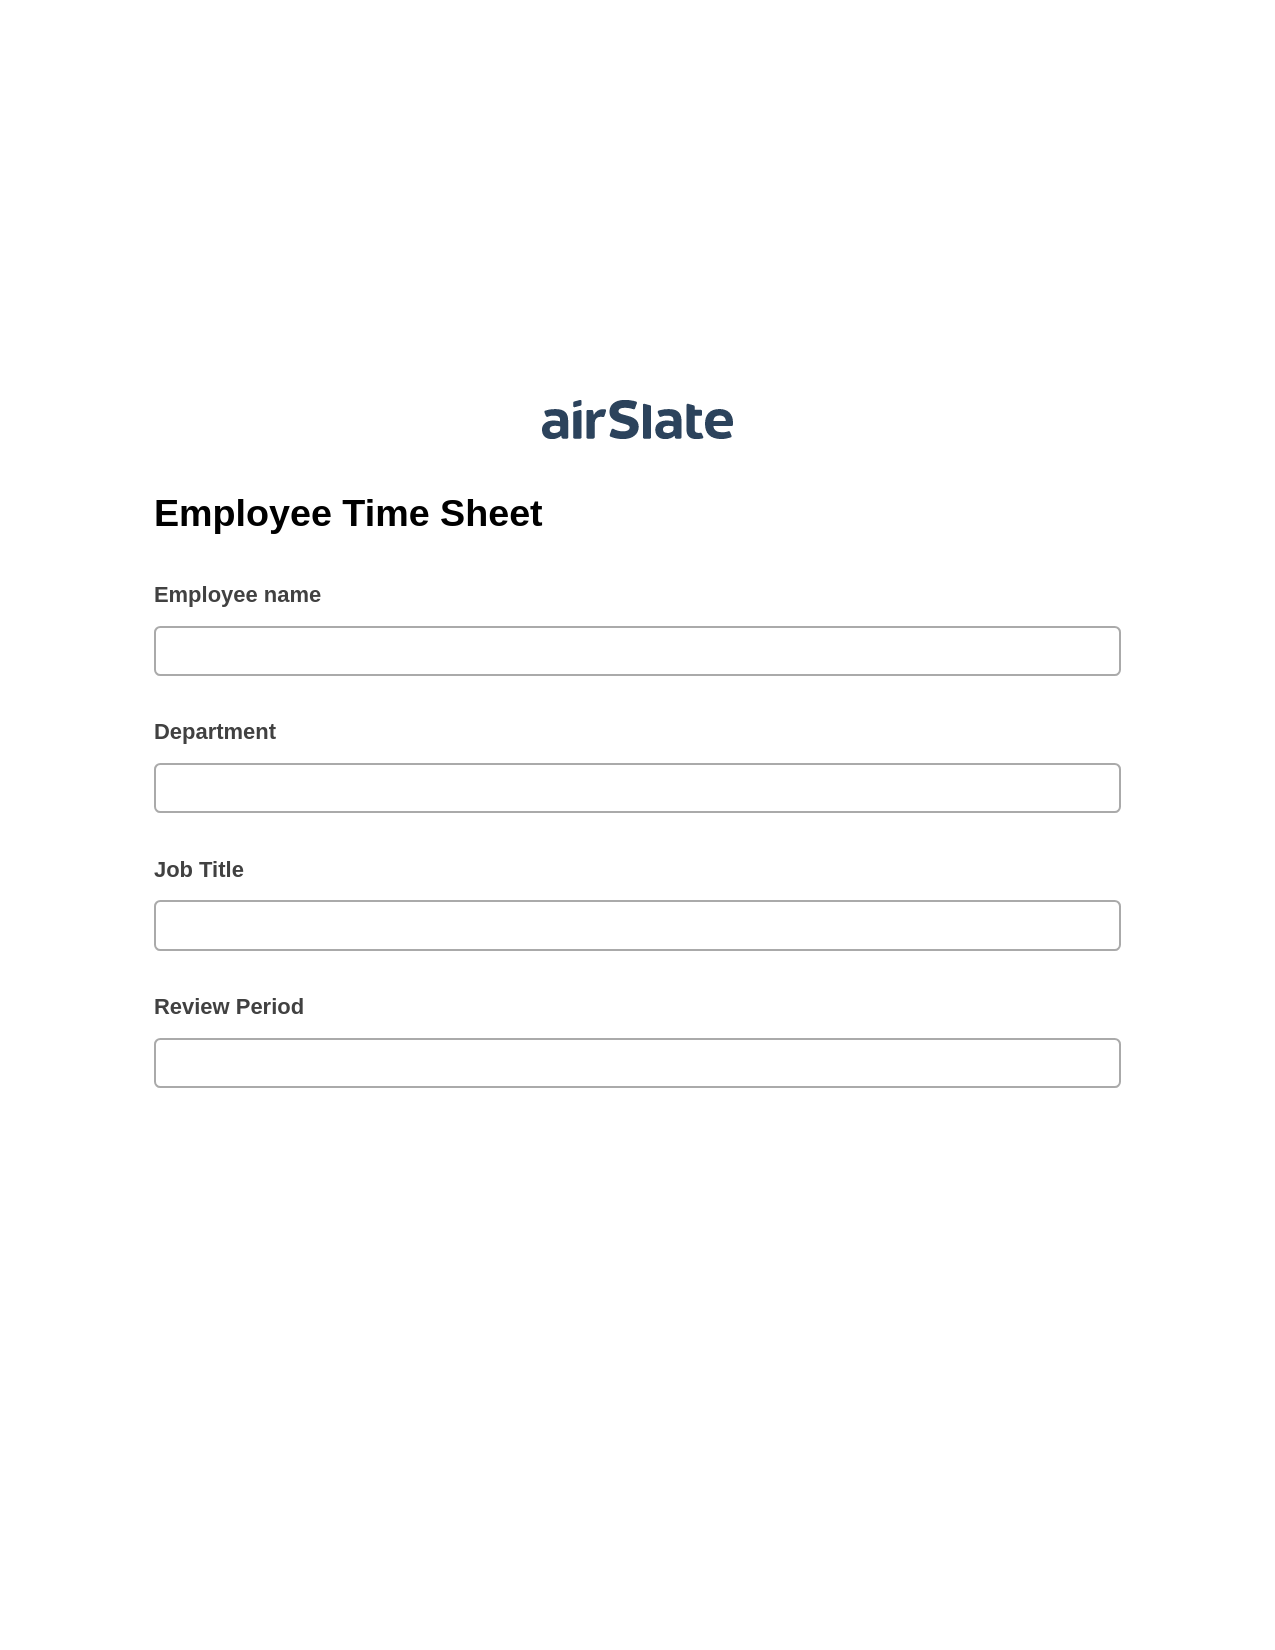 Employee Time Sheet Pre-fill from Office 365 Excel Bot, Invoke Salesforce Process Bot, Post-finish Document Bot